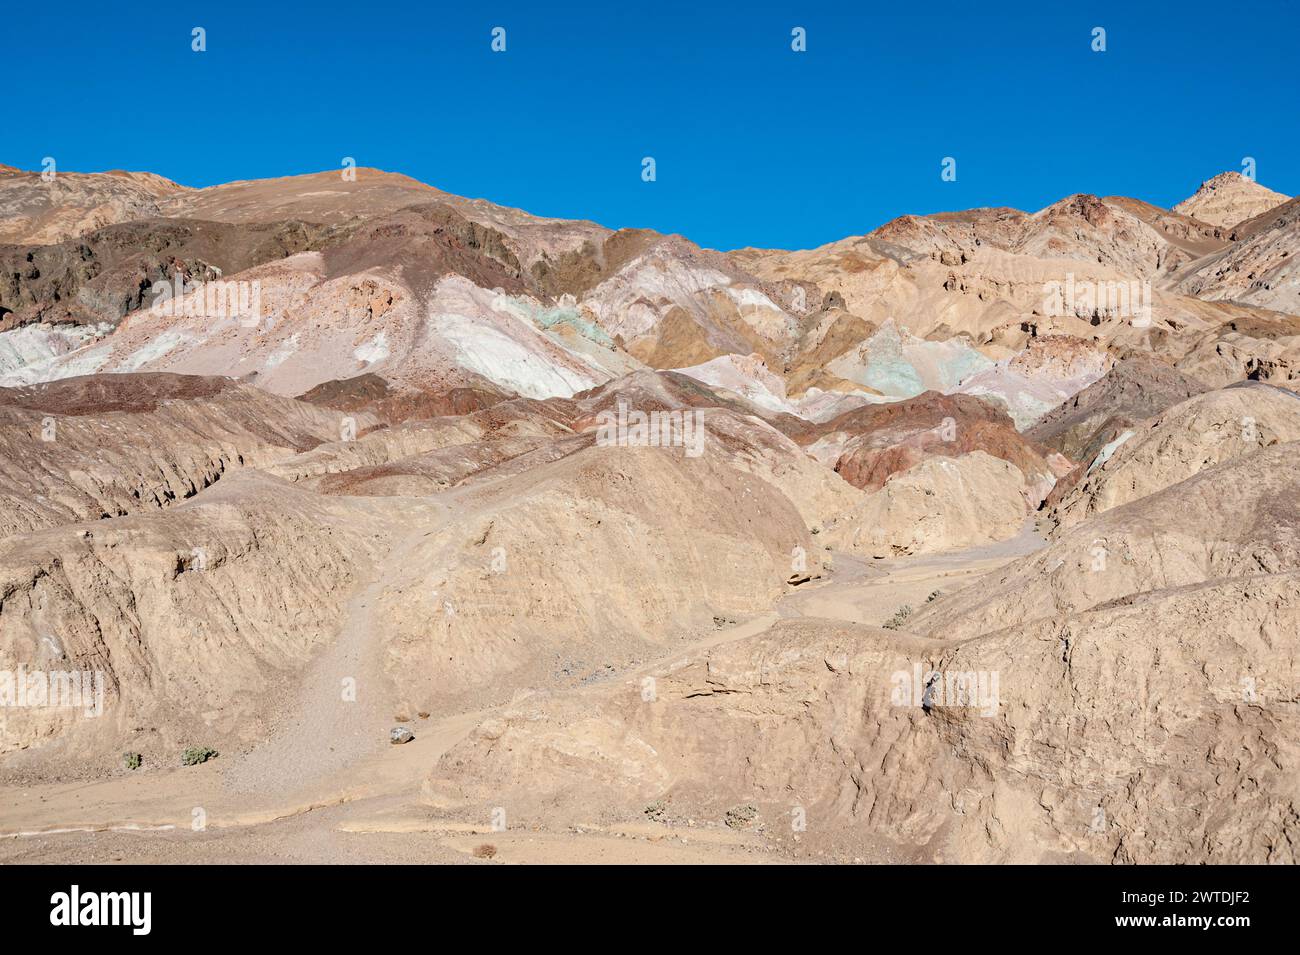 Death Valley Arroyo or dry river bed, USA Stock Photo